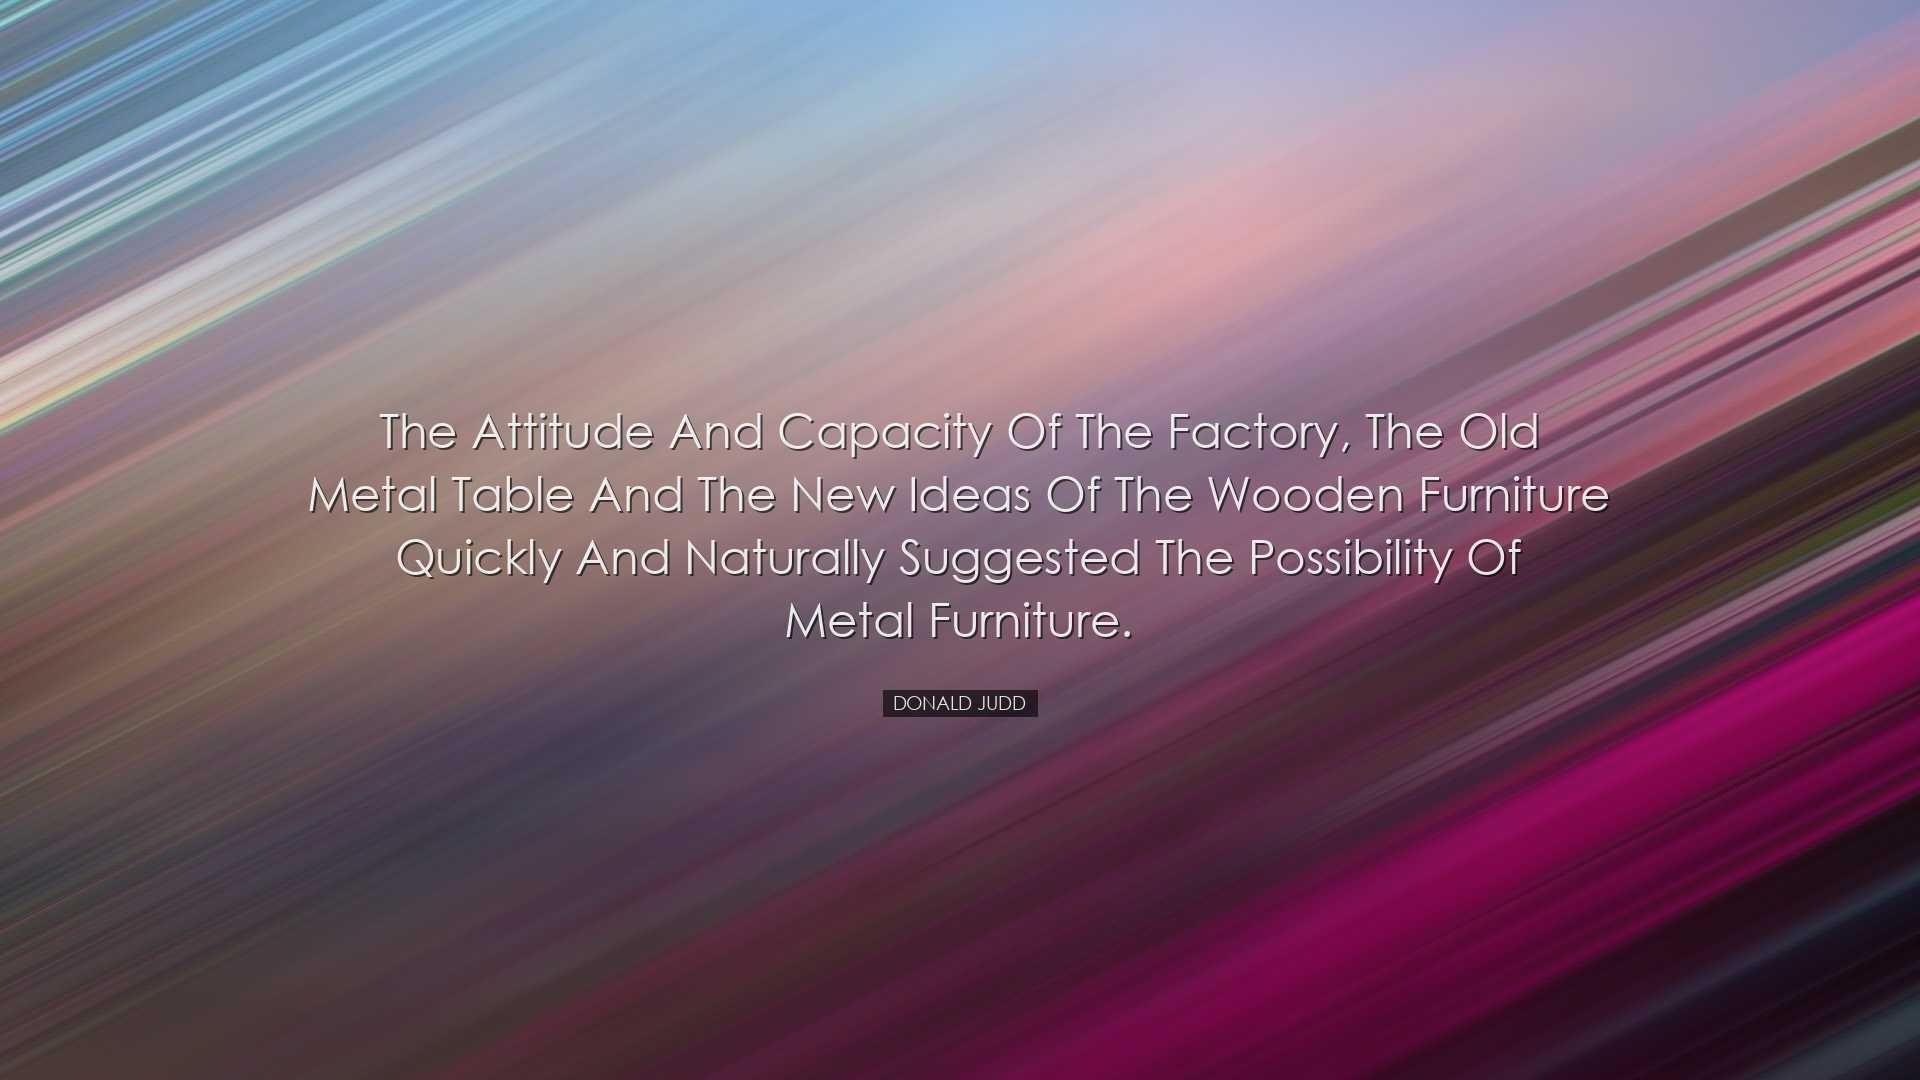 The attitude and capacity of the factory, the old metal table and